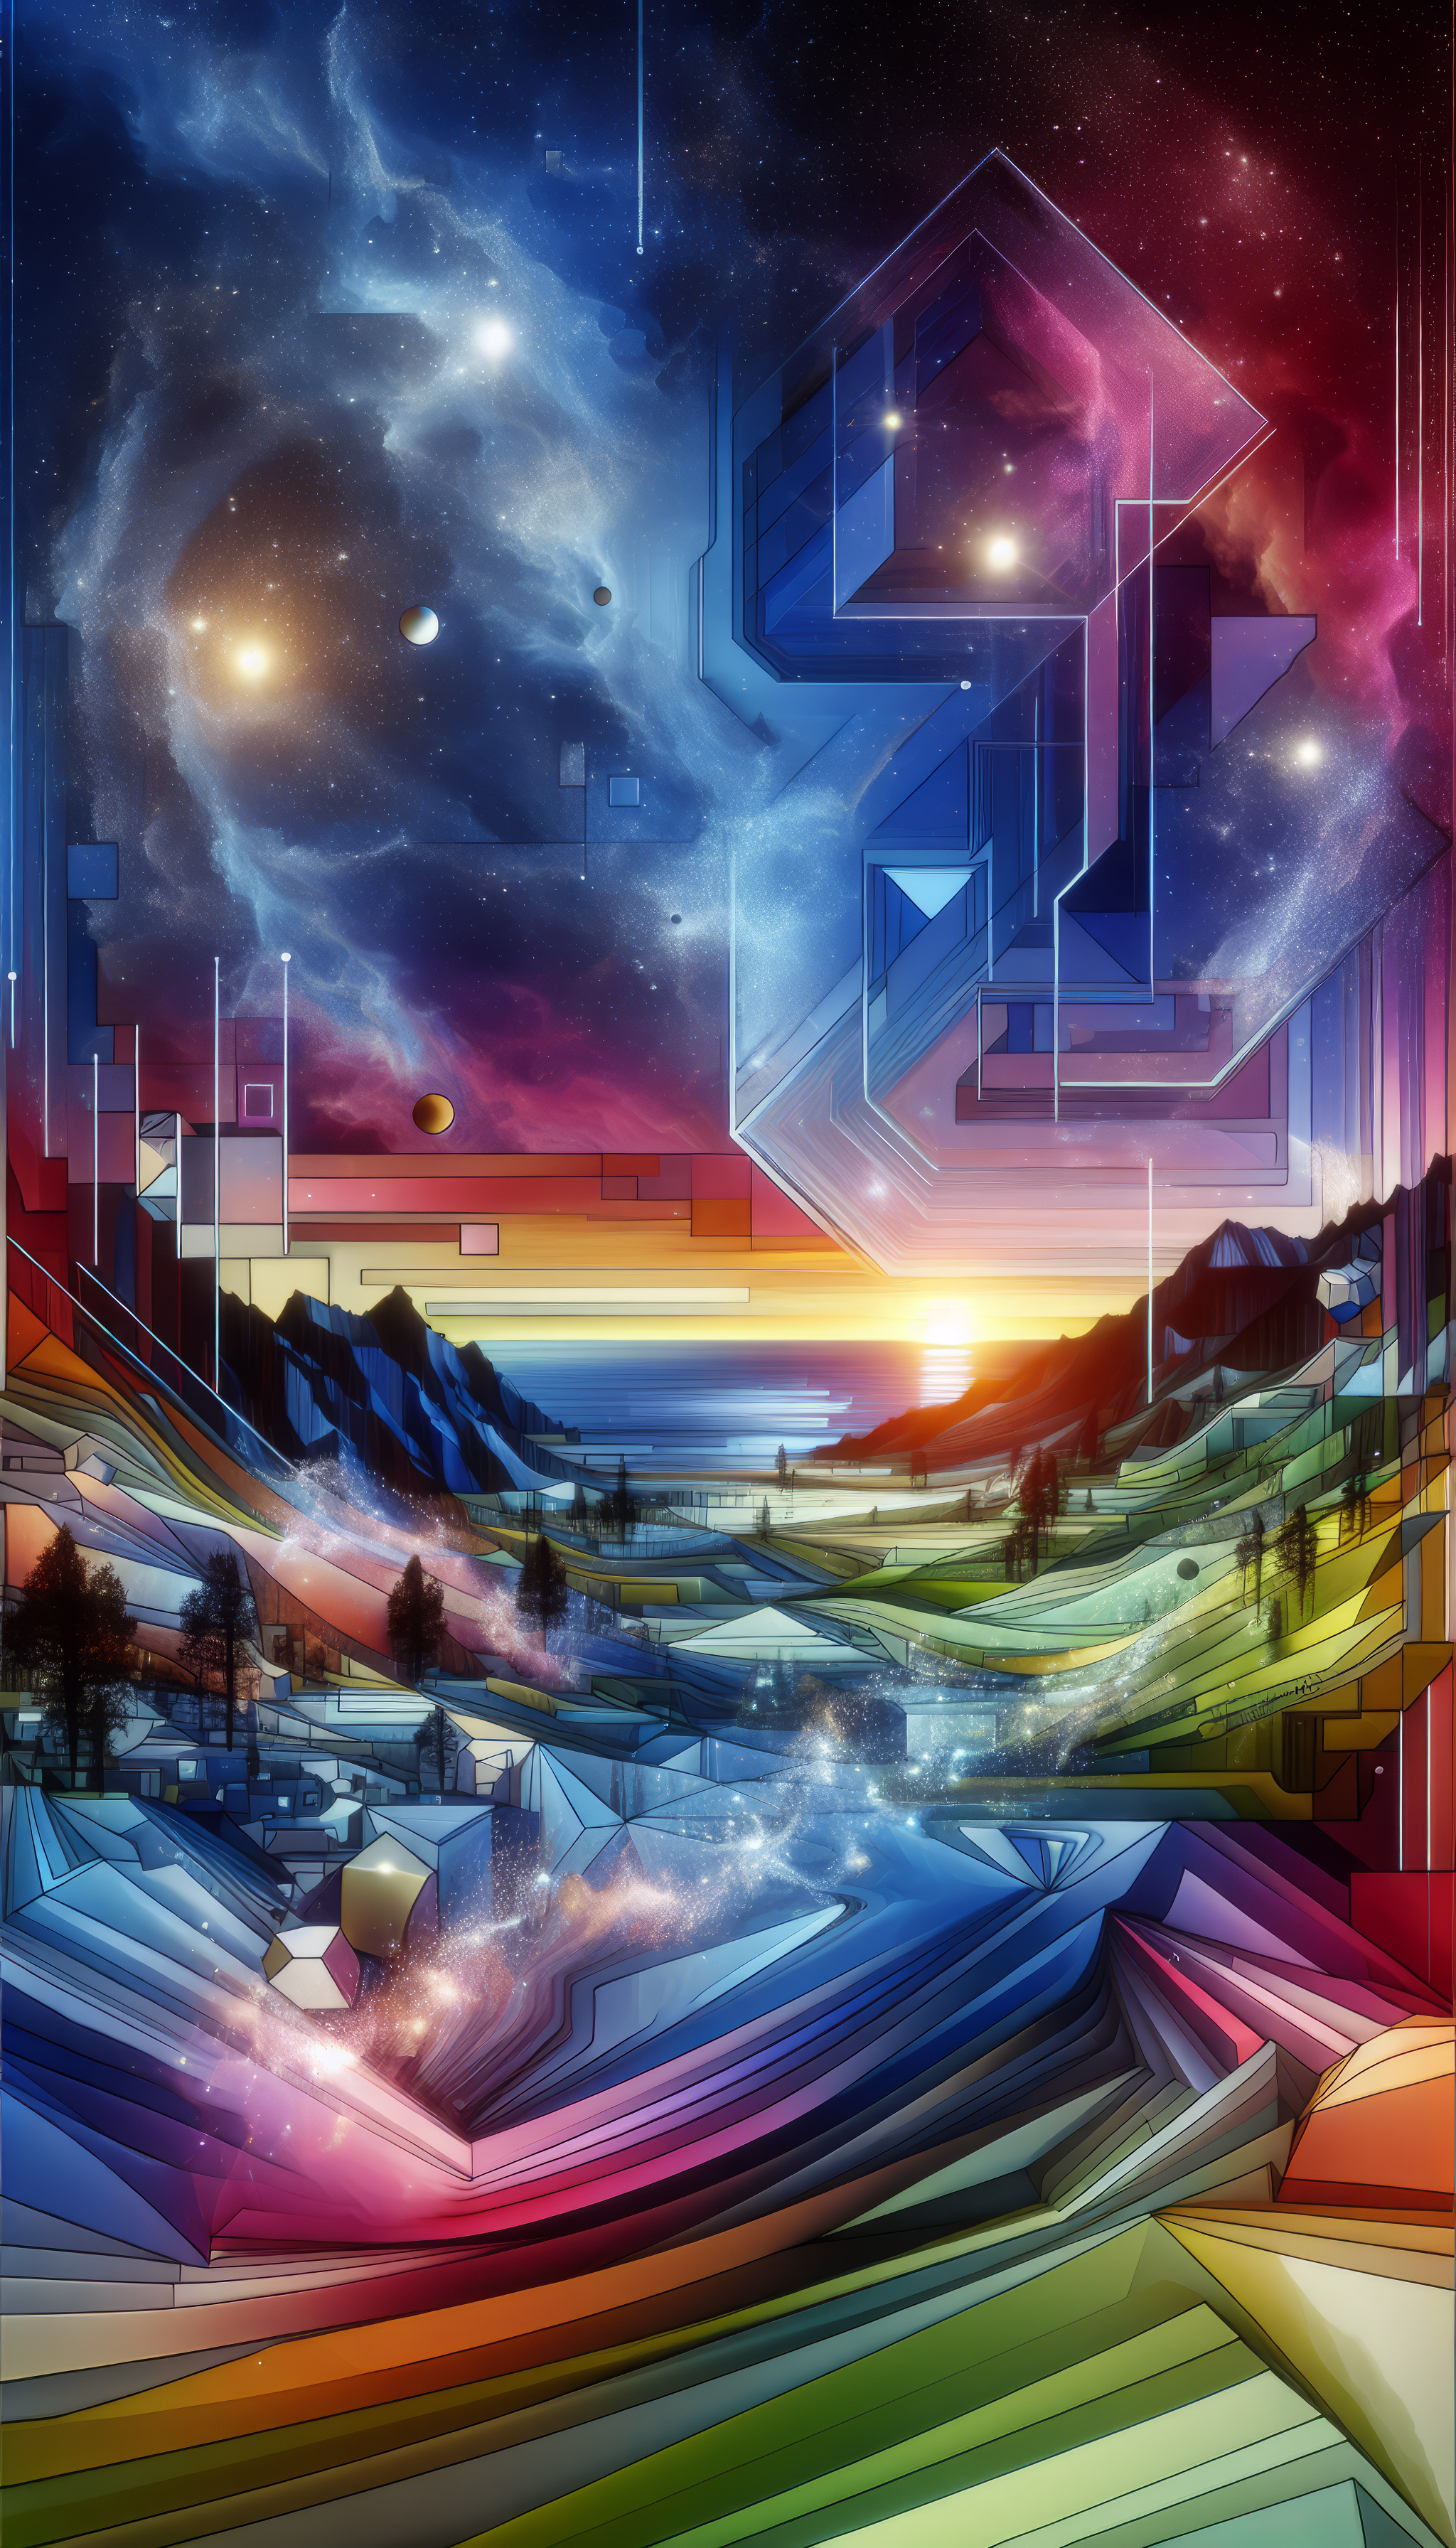 Colorful abstract polyscape phone wallpaper featuring geometric shapes and cosmic scenery.